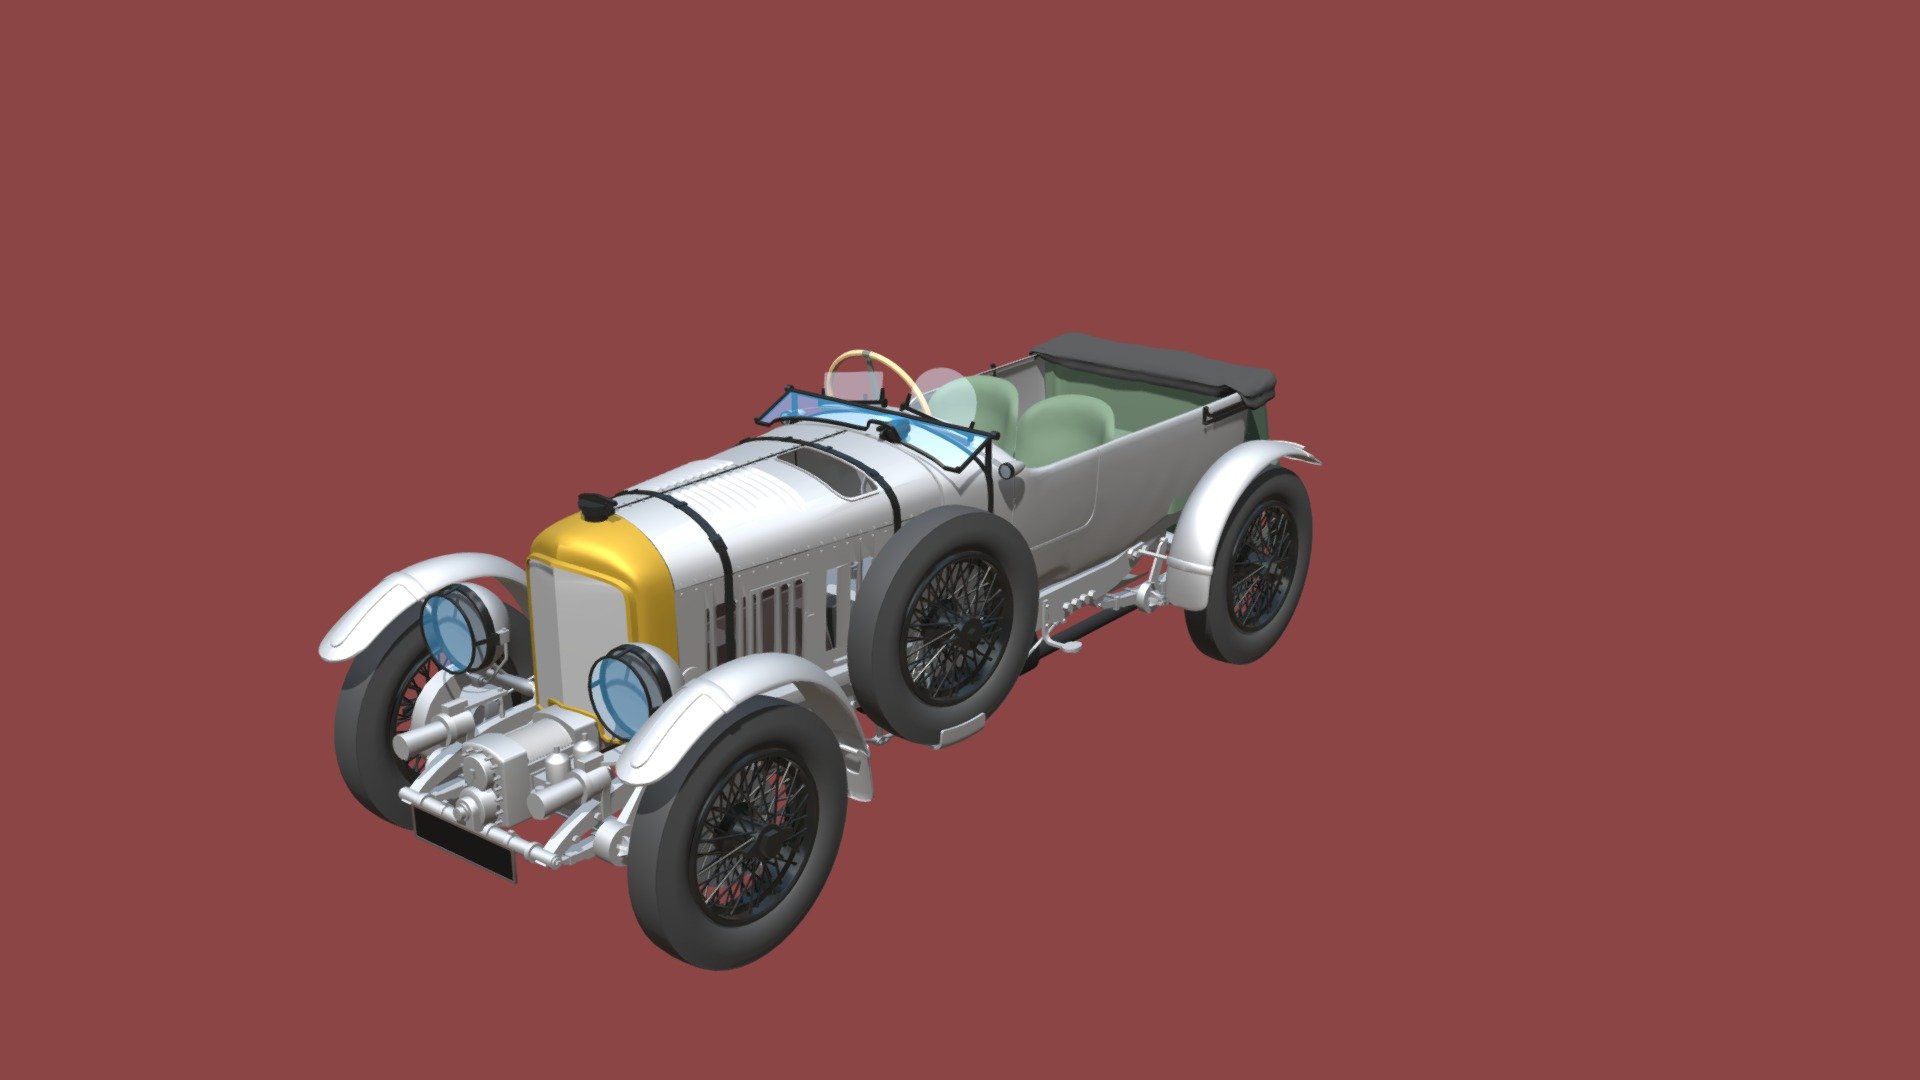 Indulge in the allure of a bygone era with our meticulously crafted 3D model of the legendary Bentley Speed Six built in 1930.
The Bentley 6½ Litre and the high-performance Bentley Speed Six were rolling chassis[3] in production from 1926 to 1930. The Speed Six, introduced in 1928, would become the most successful racing Bentley. Two Bentley Speed Sixes became known as the Blue Train Bentleys after their owner Woolf Barnato's involvement in the Blue Train Races of 1930 3d model